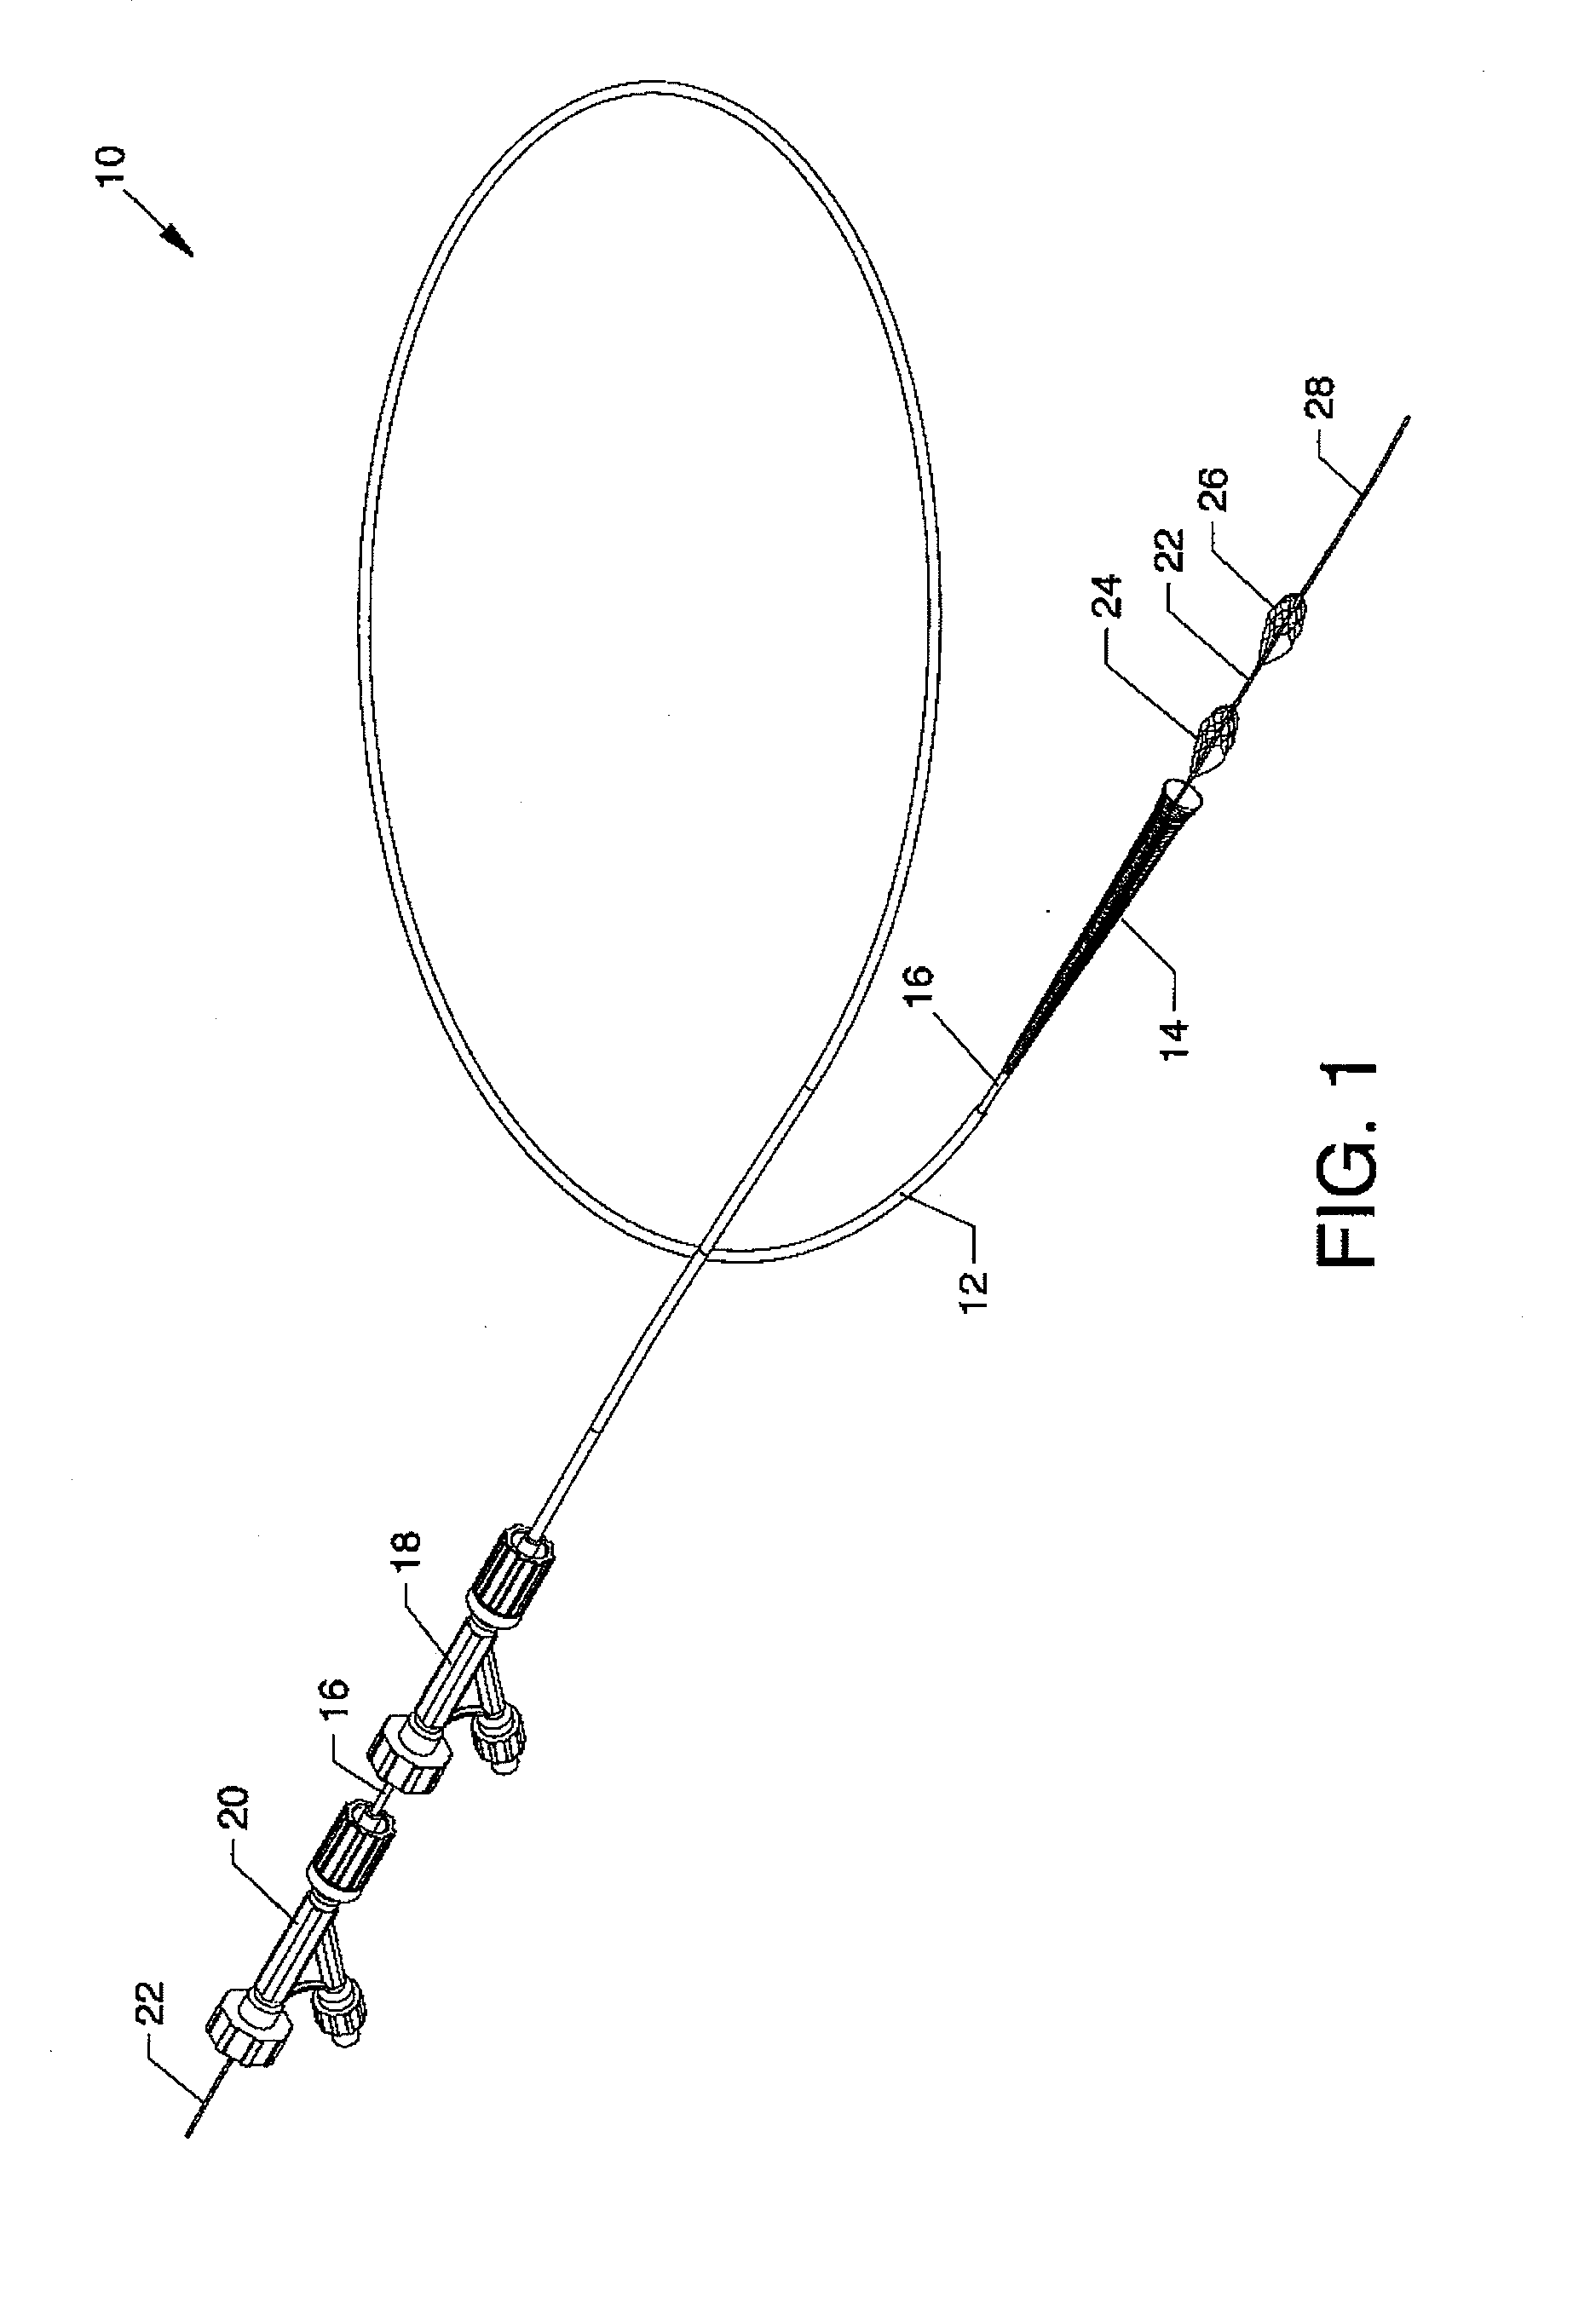 Intravascular guidewire filter system for pulmonary embolism protection and embolism removal or maceration